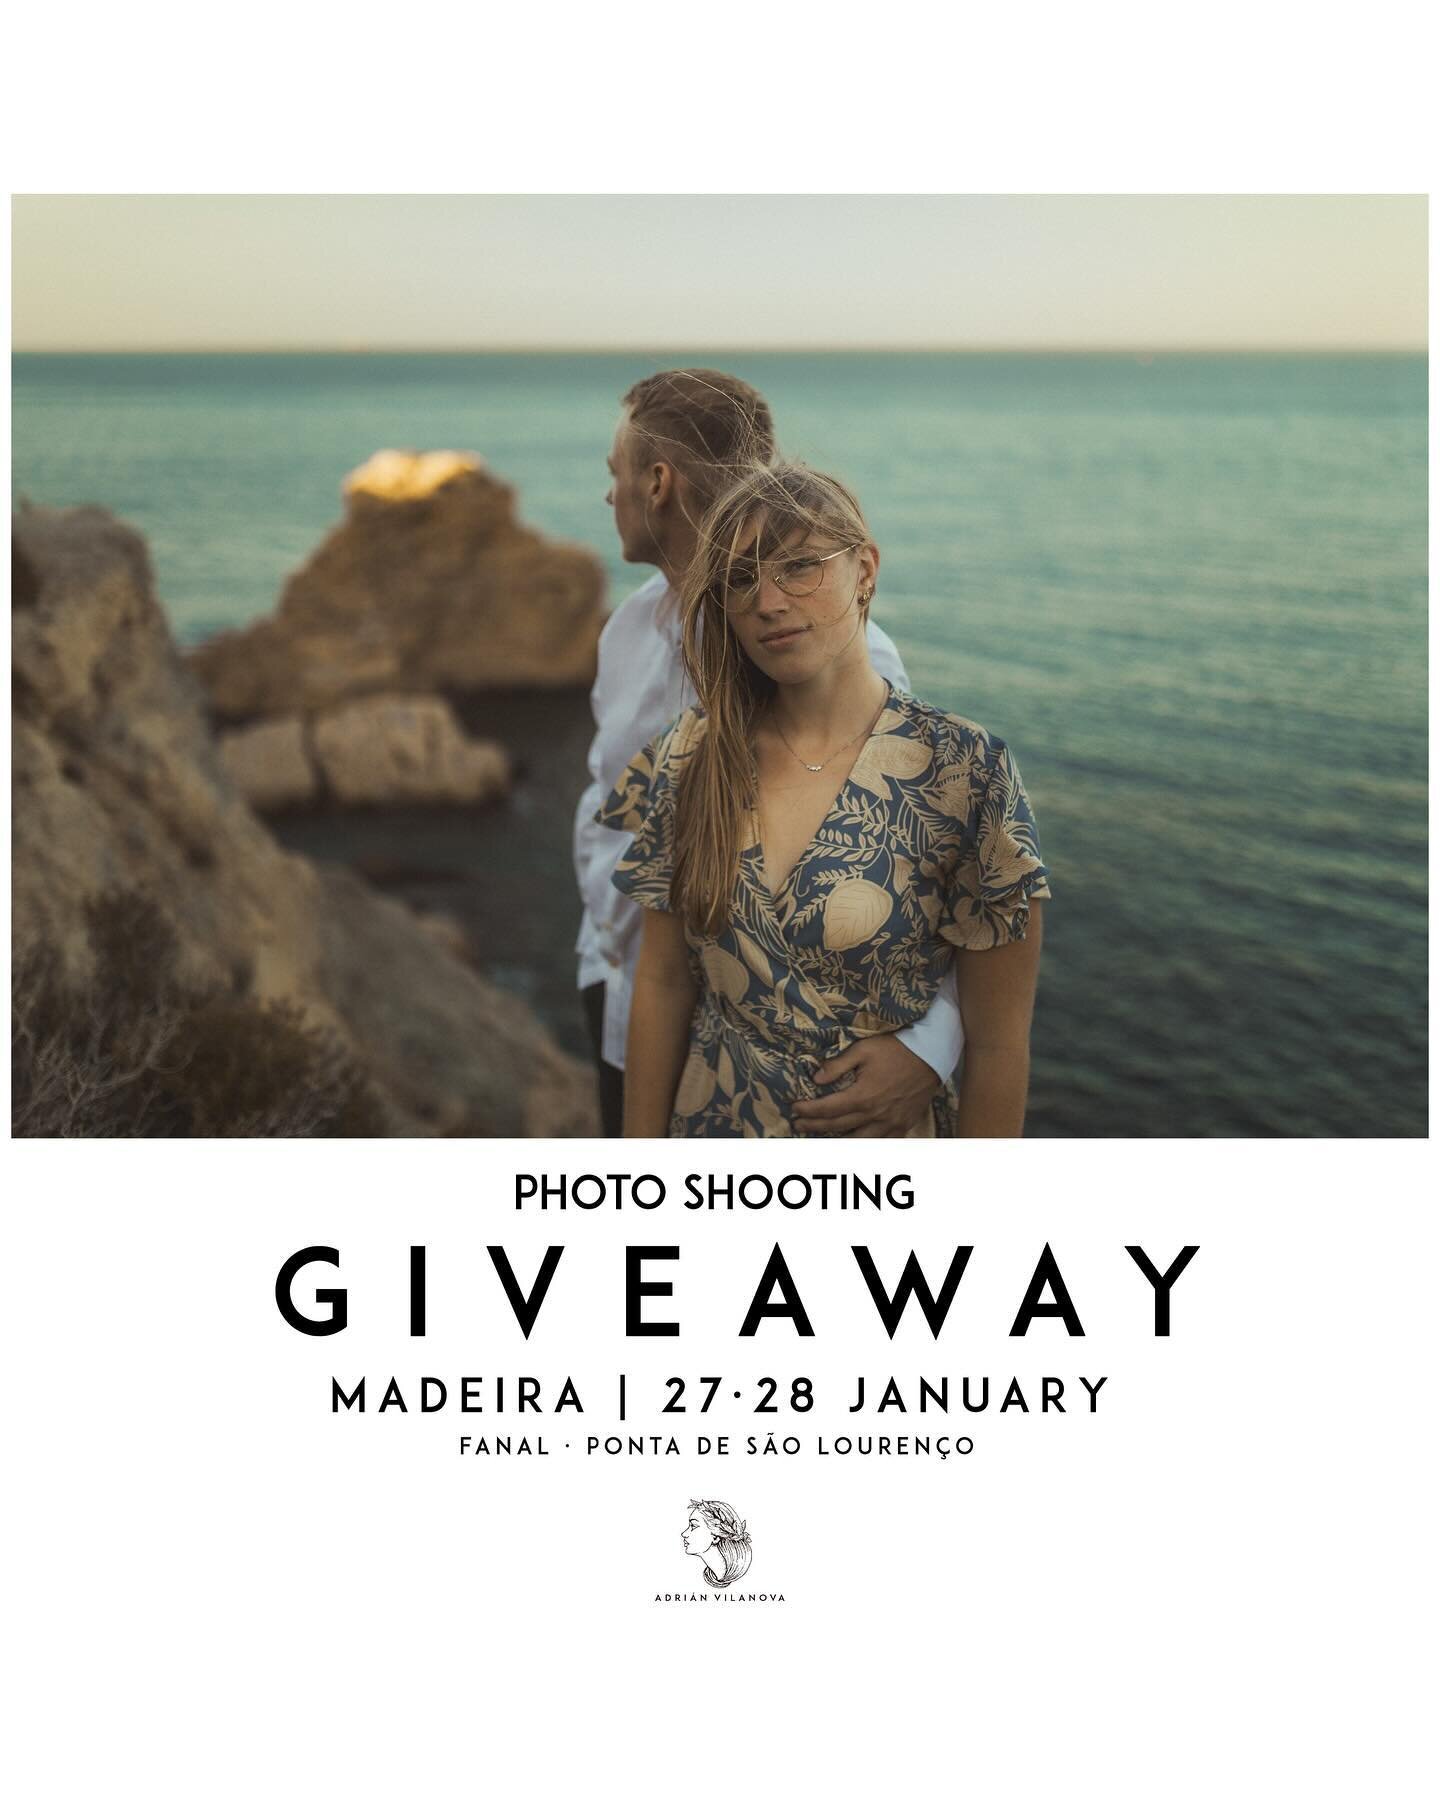 ⚡️ Win a photo shoot. An adventure!
⠀
Couple&rsquo;s session GIVEAWAY in Fanal or Ponta de S&atilde;o Louren&ccedil;o during this Saturday or Sunday. Your choice!
Transportation within the island, if necessary, included! No extra costs.
⠀
Many chance